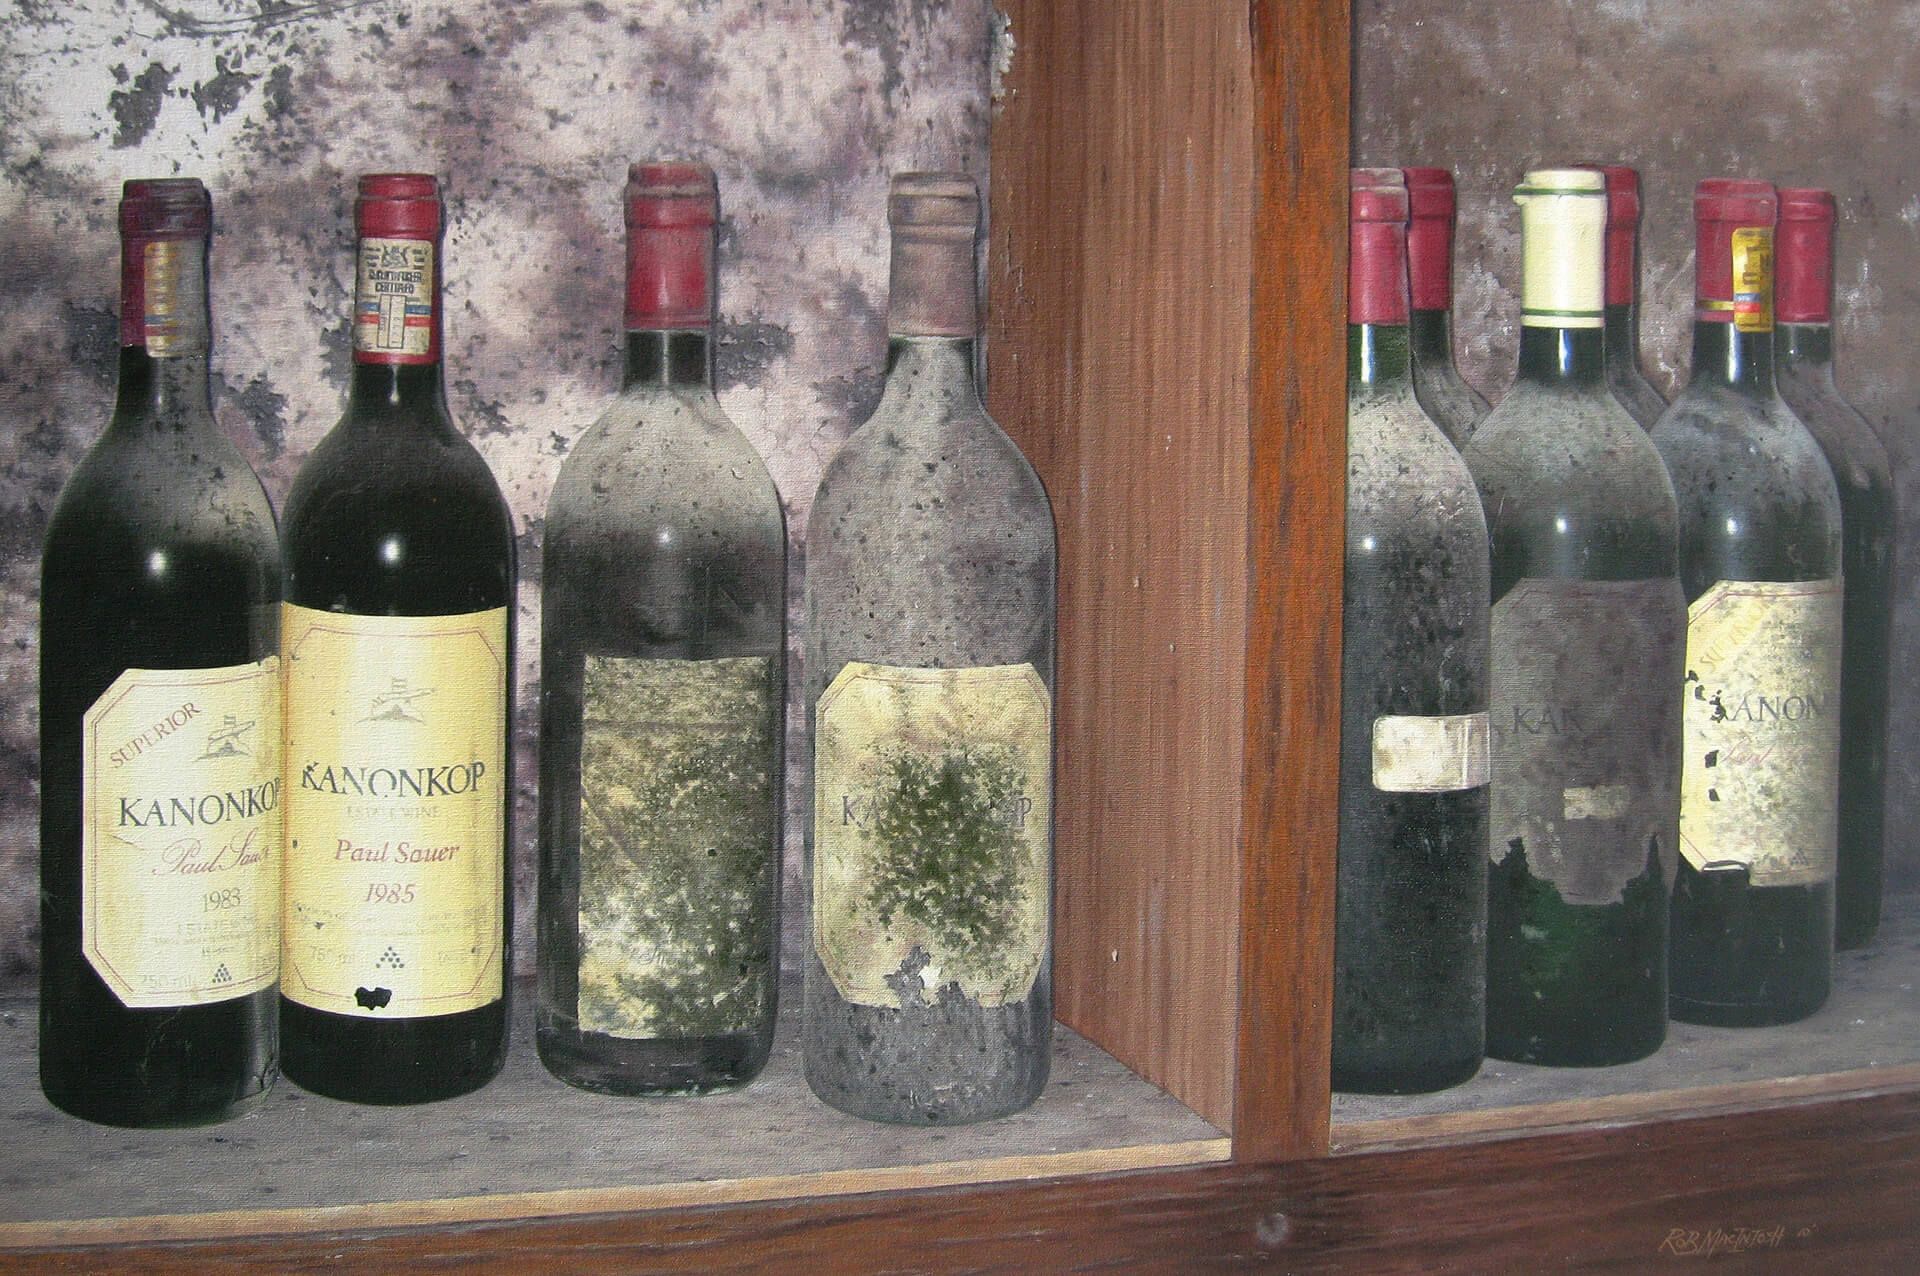 Photorealistic painting of old wine bottles collecting dust